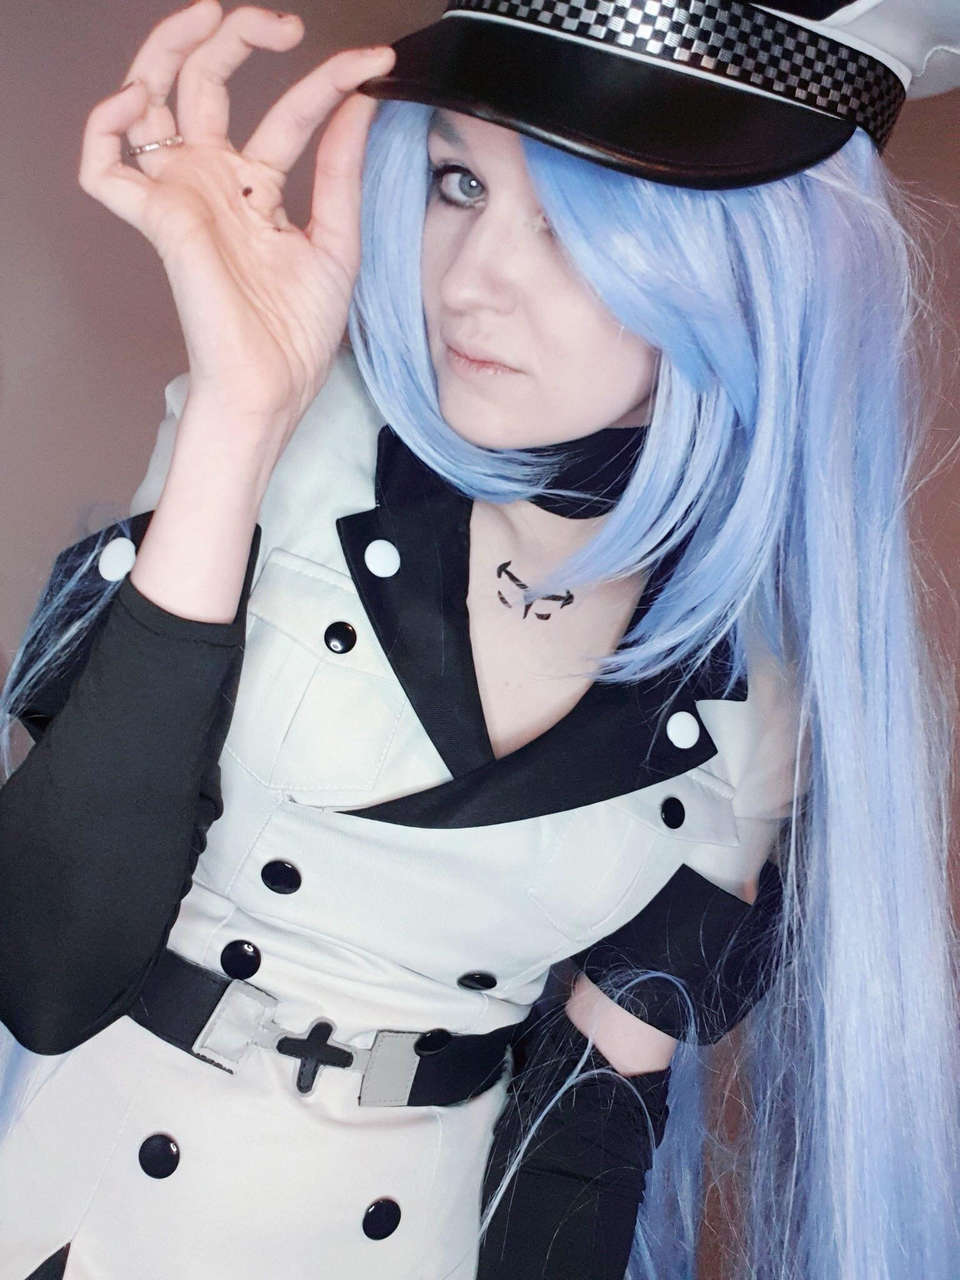 General Esdeath From Akame Ga Kill